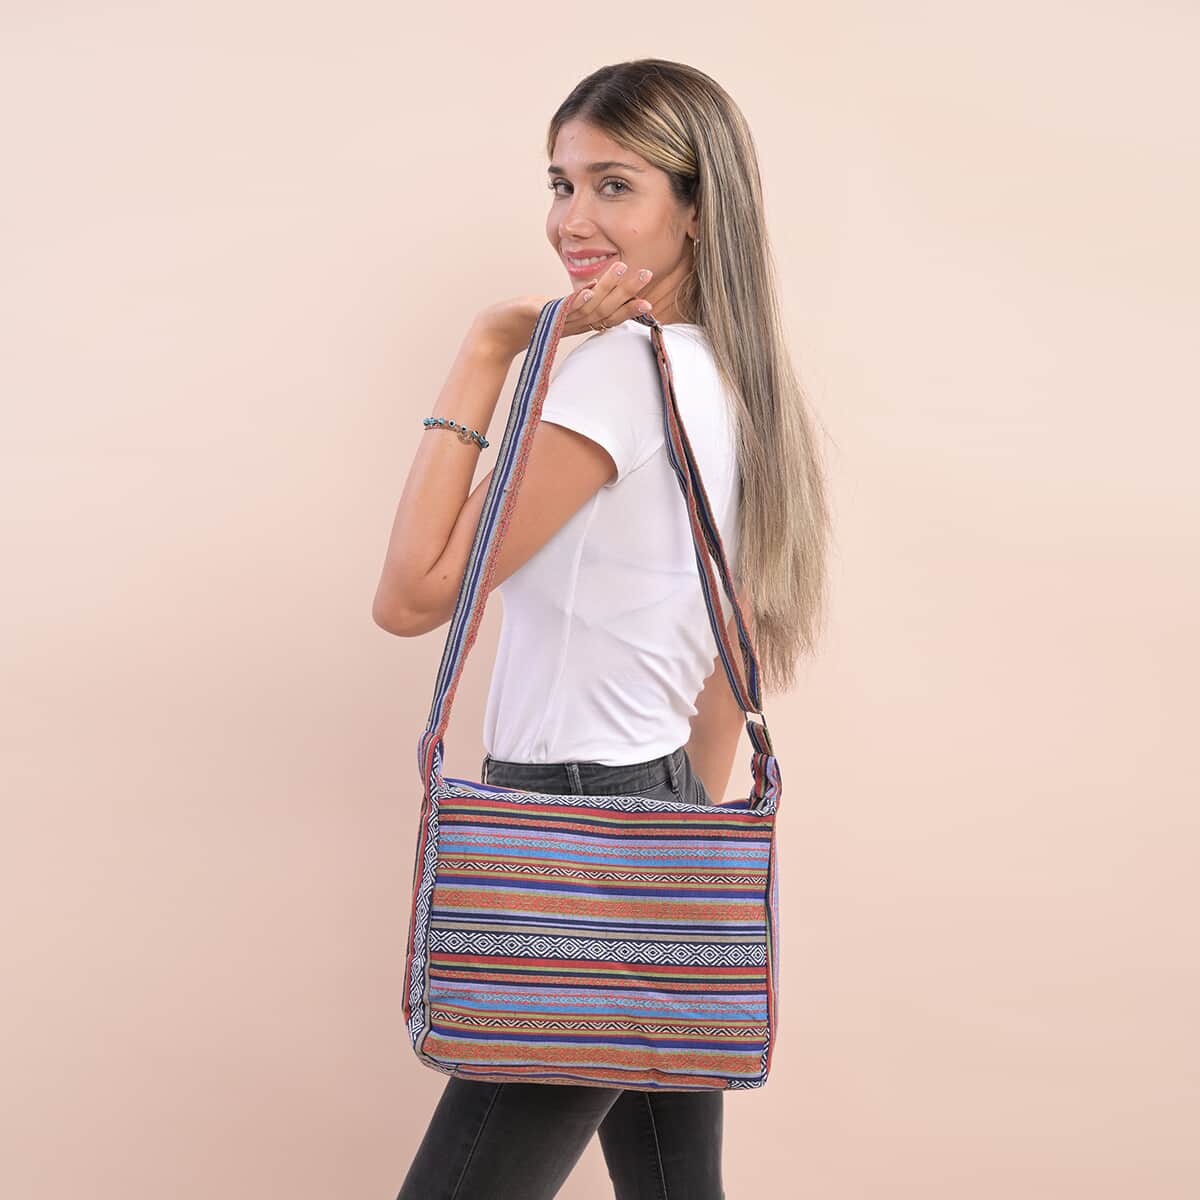 Multi Blue Tribal Pattern 65% Polyester and 35% Cotton Crossbody Bag (12"x3.5"x10") with Shoulder Strap (47") image number 2